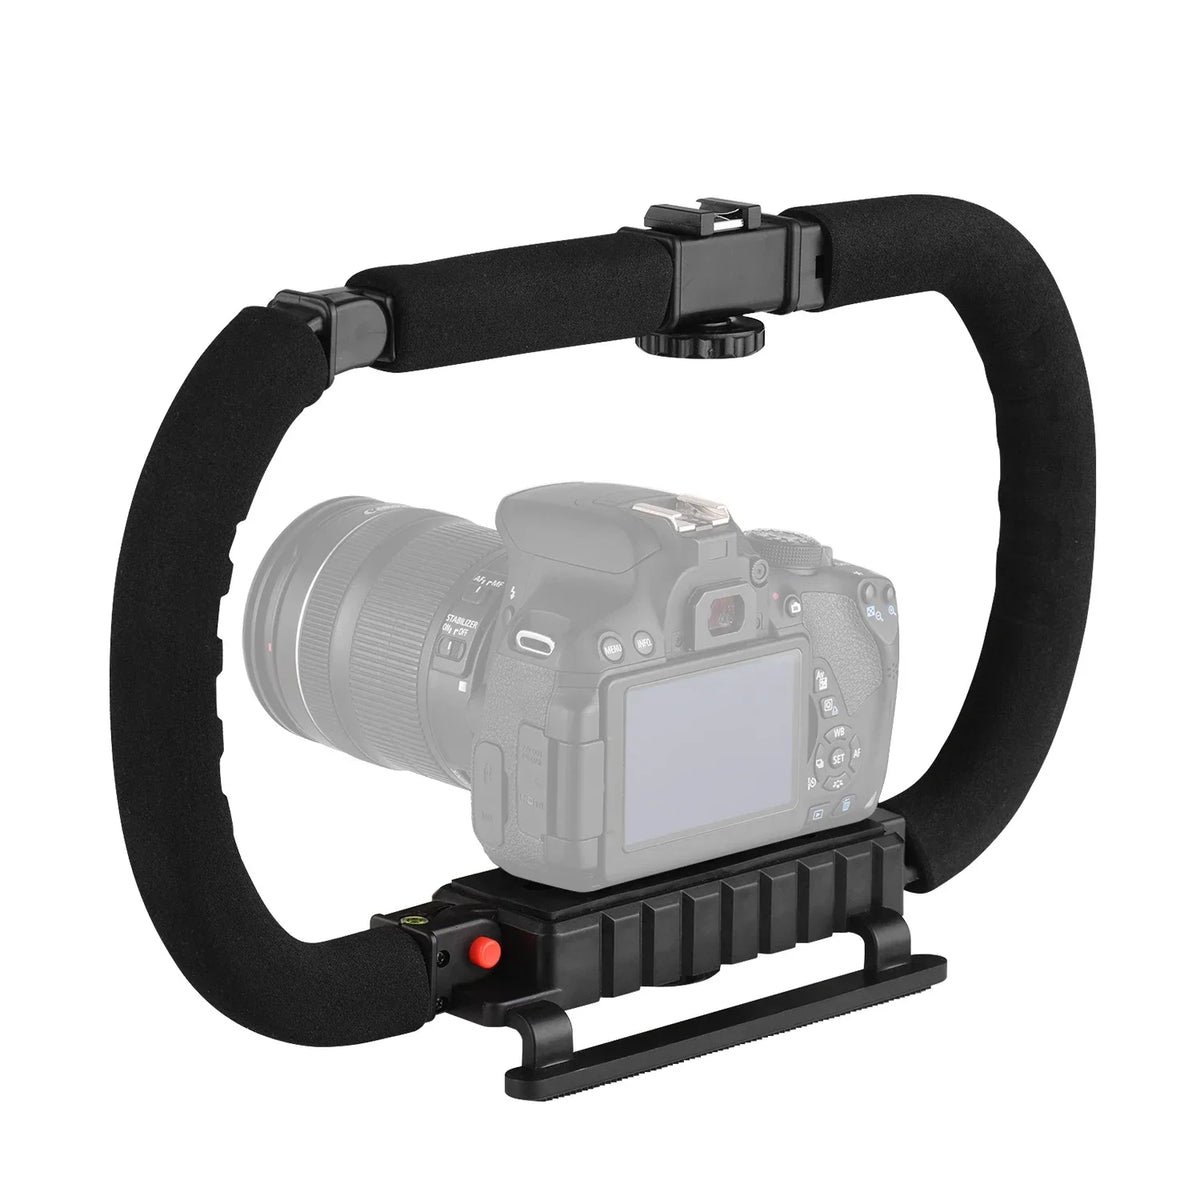 Upgraded C-Shaped Stabilizer: Universal Mount, Cold-Shoe & Durable Design